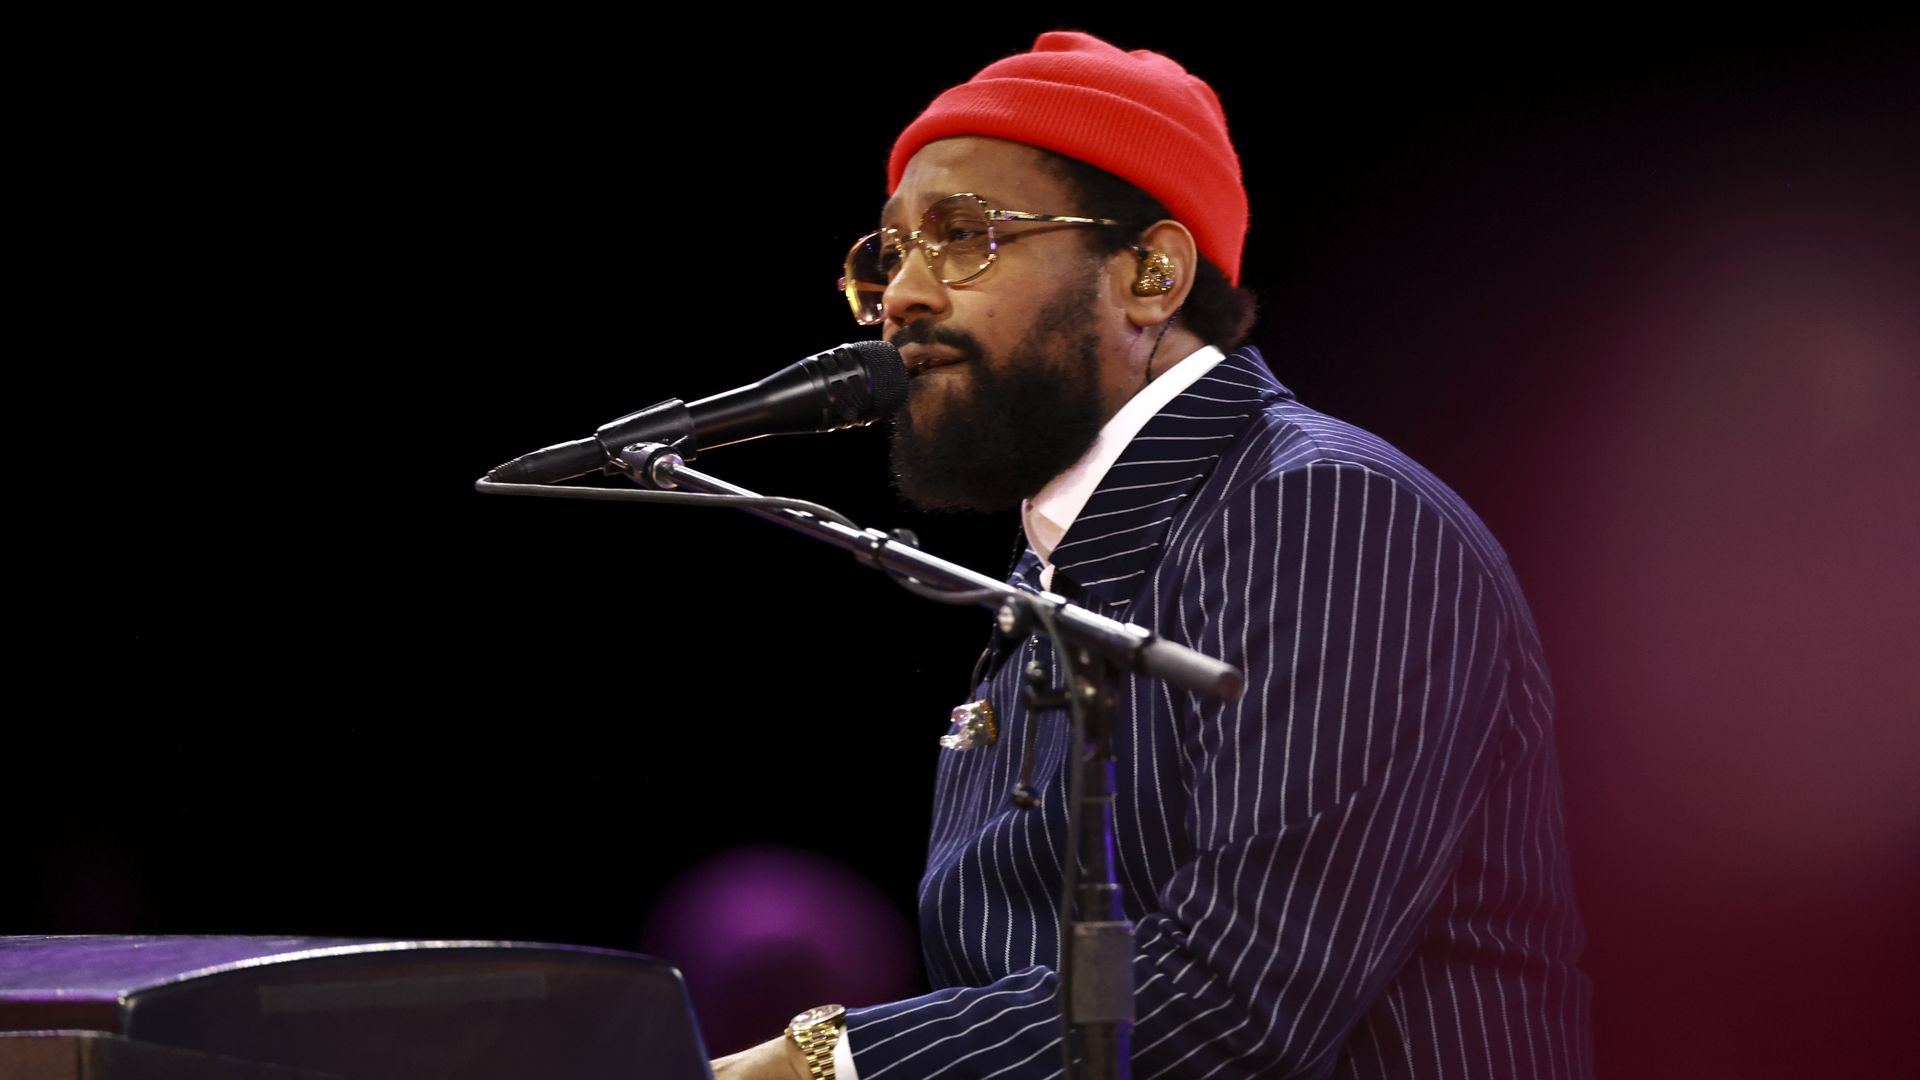 Photo shows PJ Morton singing into a microphone and playing a piano. He wears a pinstripe jacket, glasses, gold watch and a red beanie.